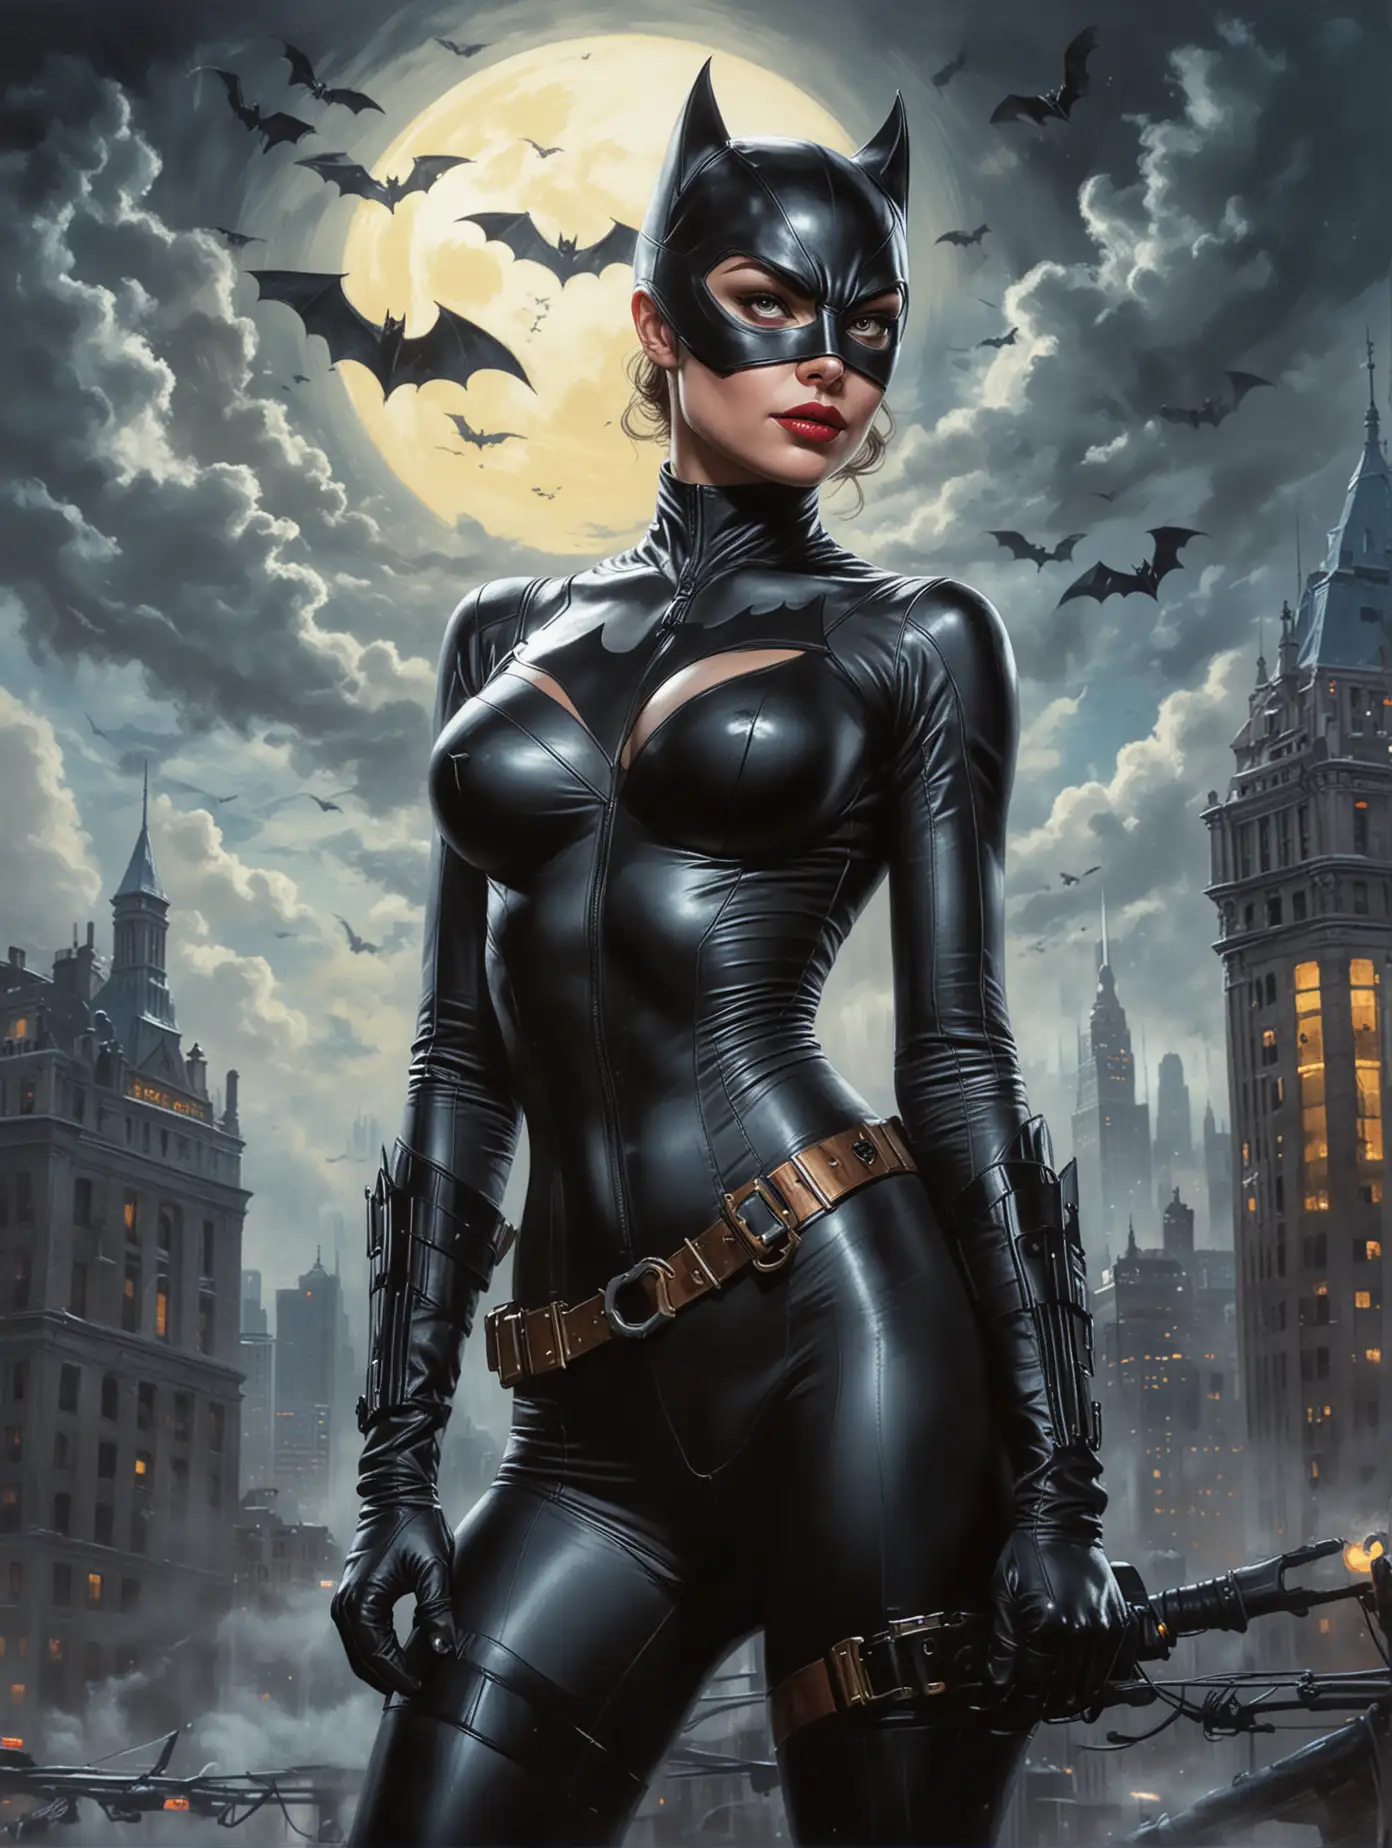 Sensual Catwoman in Gotham City A Cinematic Oil Painting